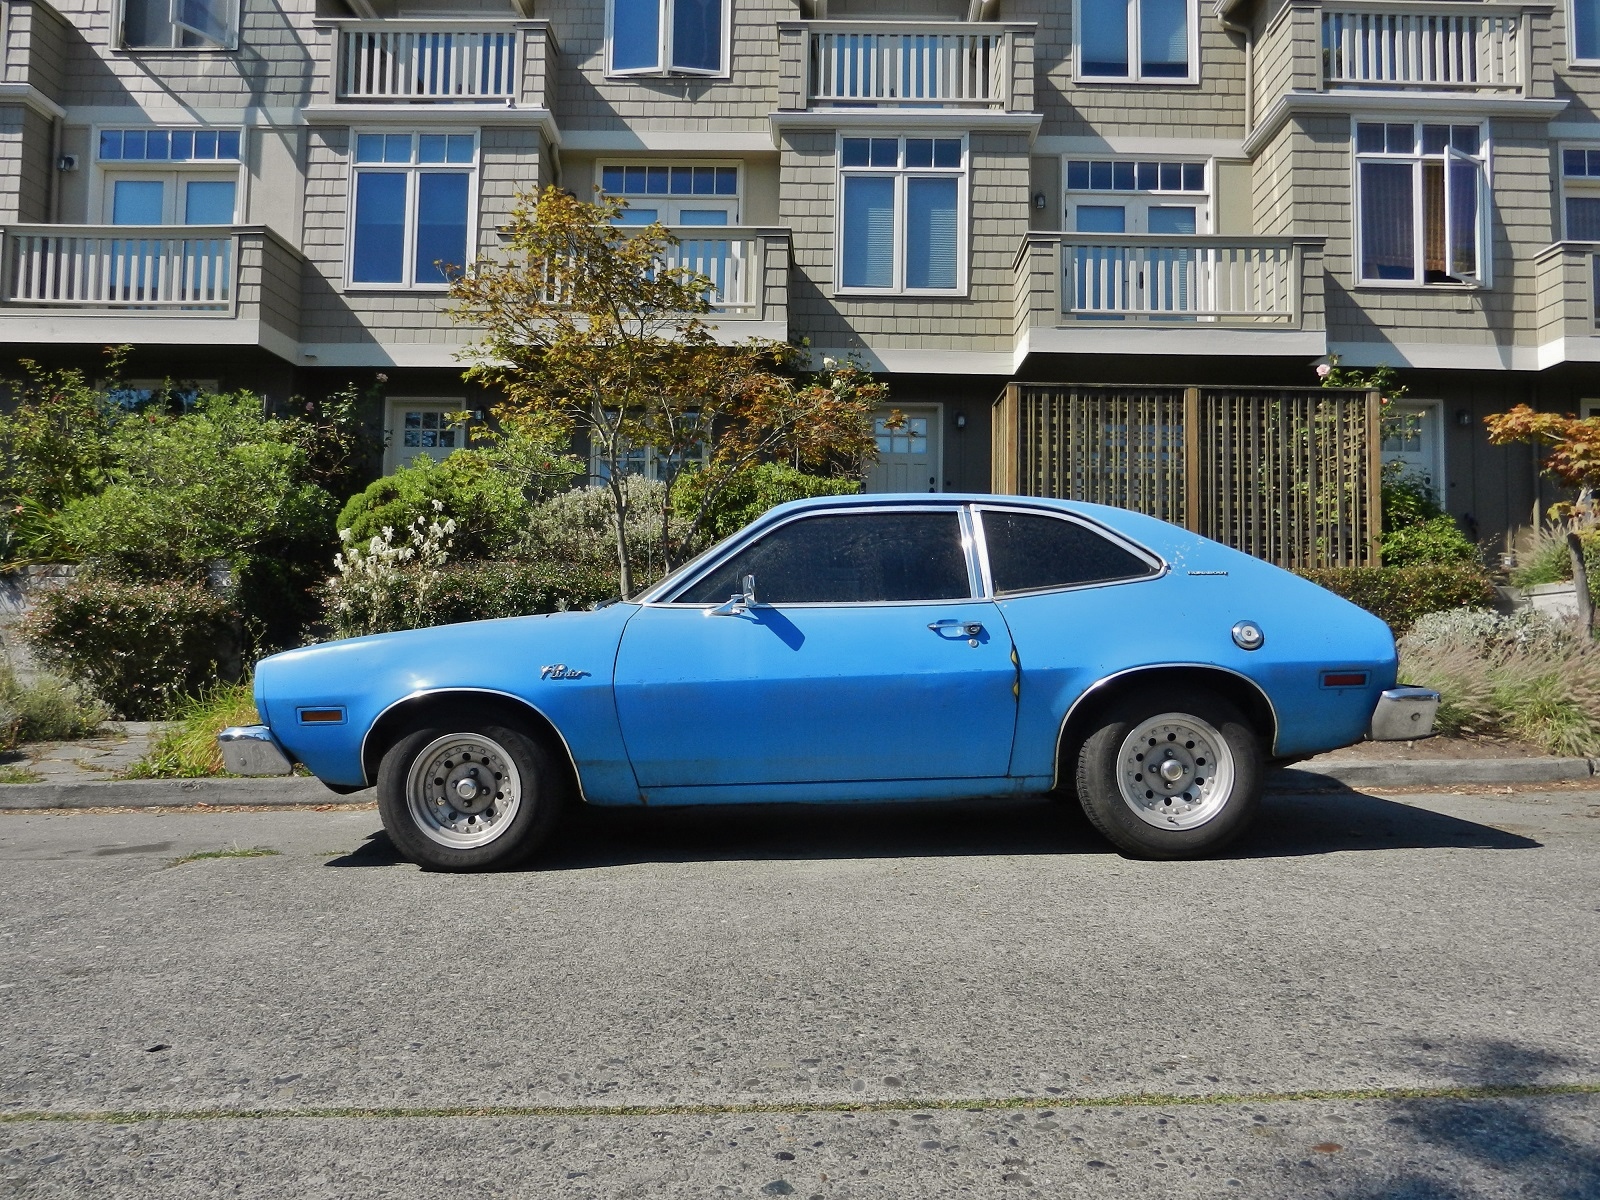 Ford pinto is a good example of american style, perfect look and high quali...